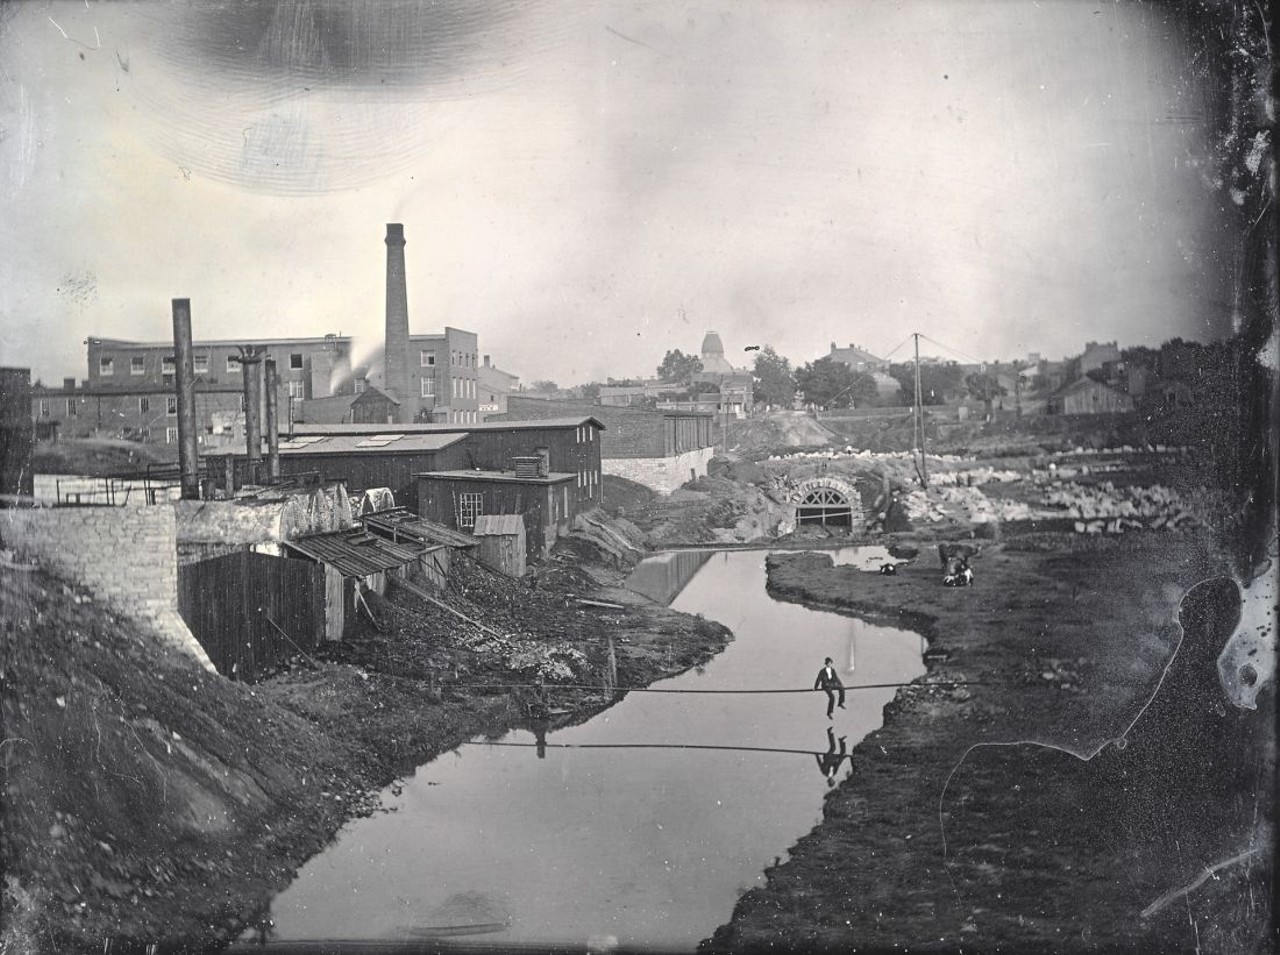 MILL CREEK SEWER UNDER CONSTRUCTION NEAR TENTH STREET, 1868
"The Mill Creek sewer had a 20-feet-wide opening and required structural walls nearly 6 feet thick. St. Louis's natural bedrock formed its bas, and where there was no stable bedrock to be found, 9-inch square timbers were used." &#151; Andrew Wanko, 'Great River City'
Chouteau's Mill Creek, East from Thirteenth and Gratiot showing construction of the Mill Creek Sewer. A man can be seen sitting on the pipe over the stream. Daguerreotype by Thomas M. Easterly, 1868. Missouri Historical Society Collections.